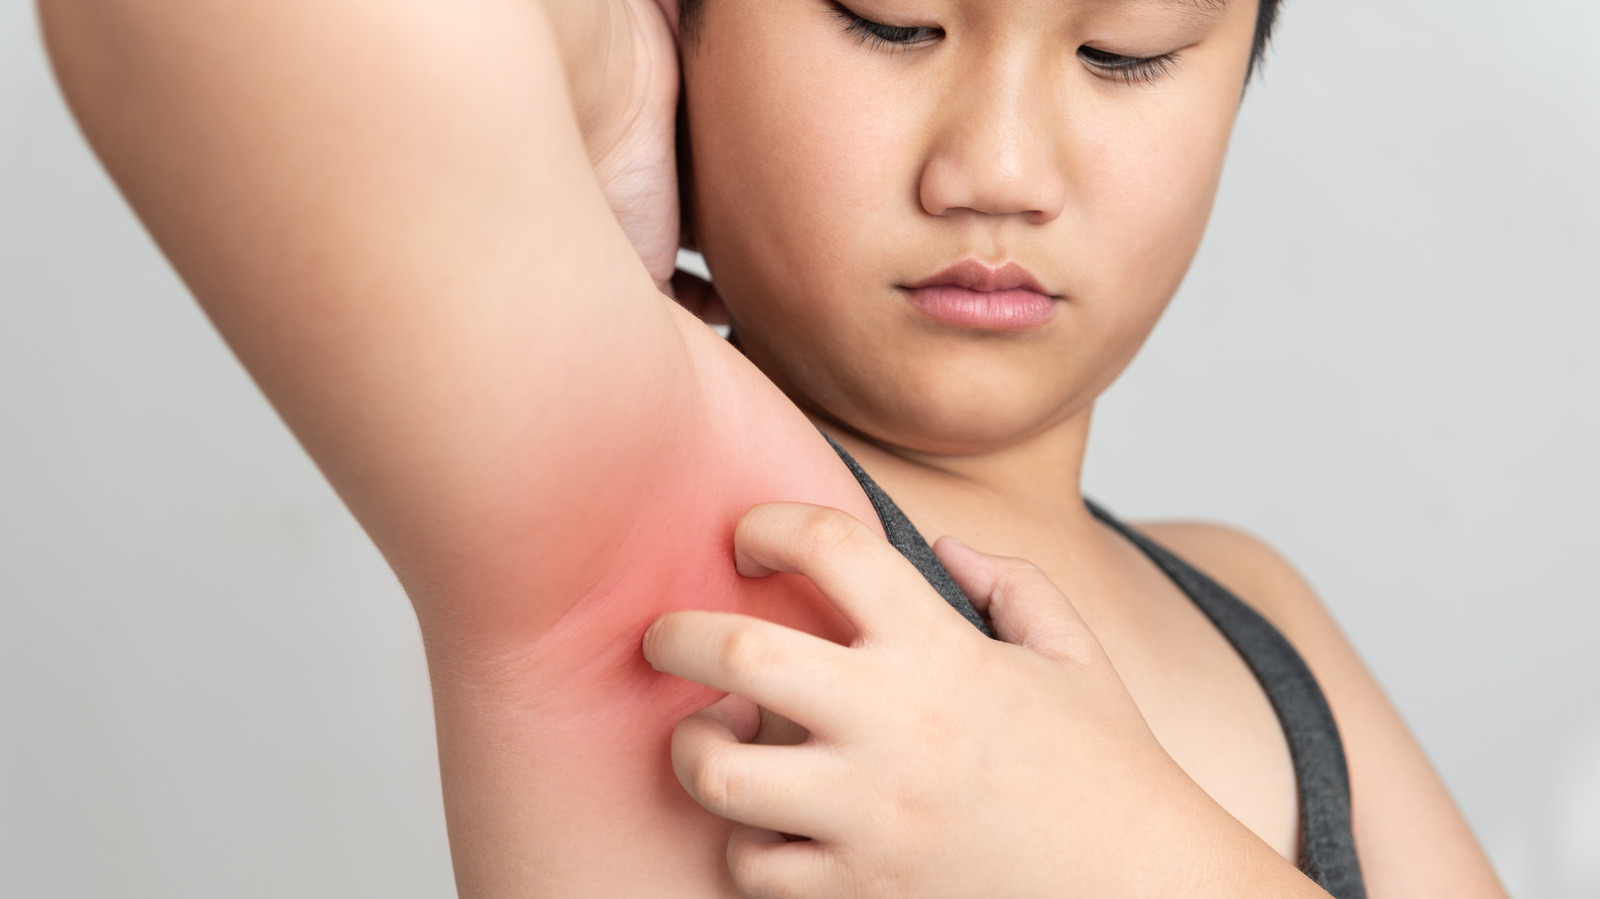 Itchy Armpits: Reasons and Treatments for This Skin Condition